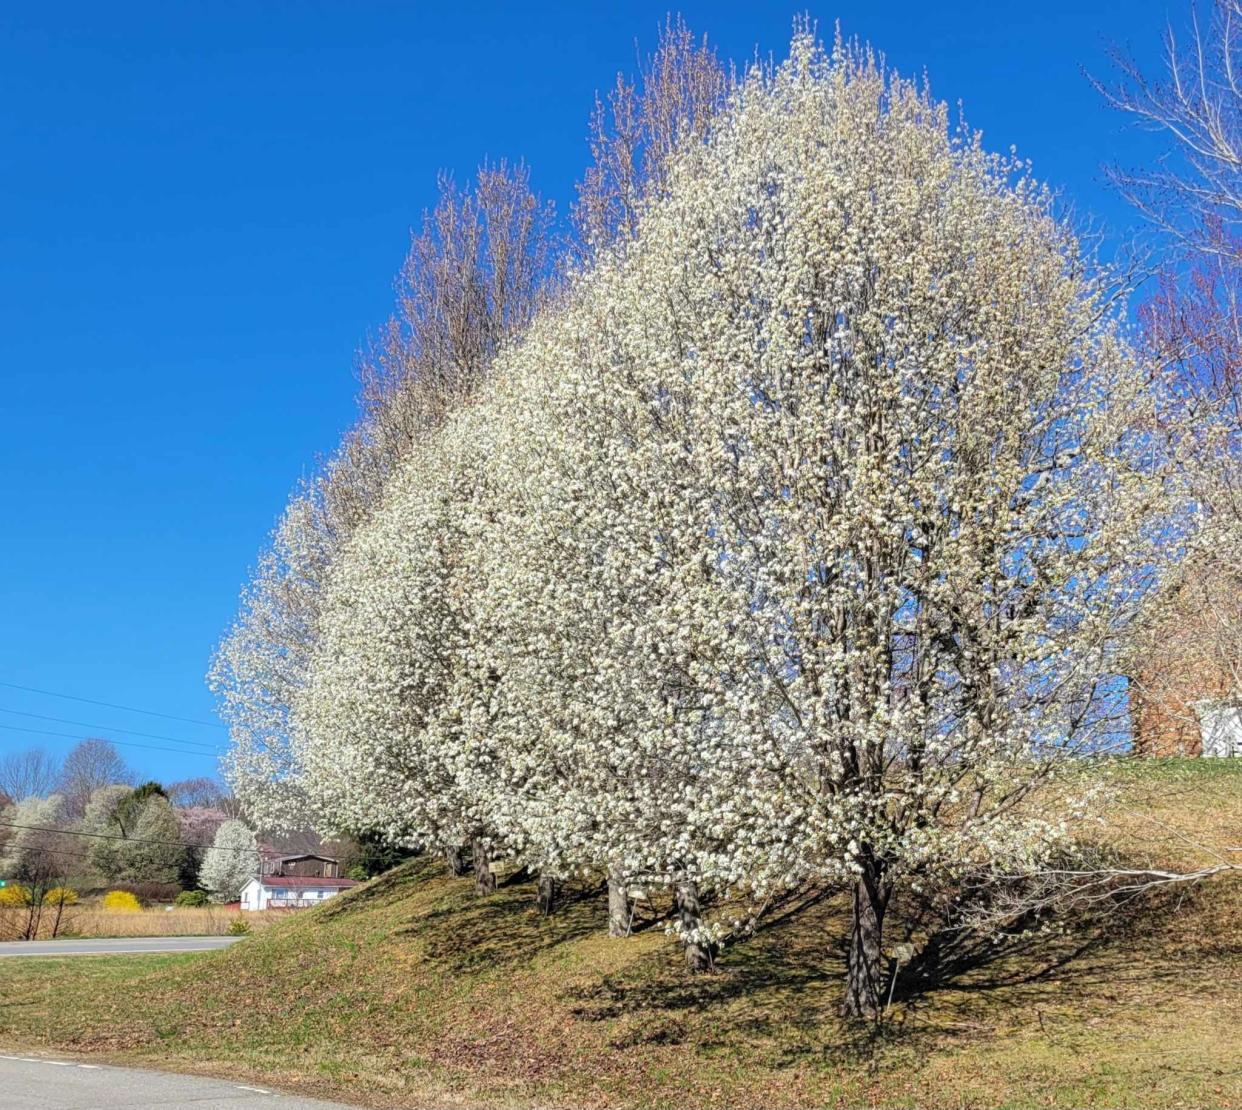 Bradford pears are now considered an invasive species for many states in the U.S.